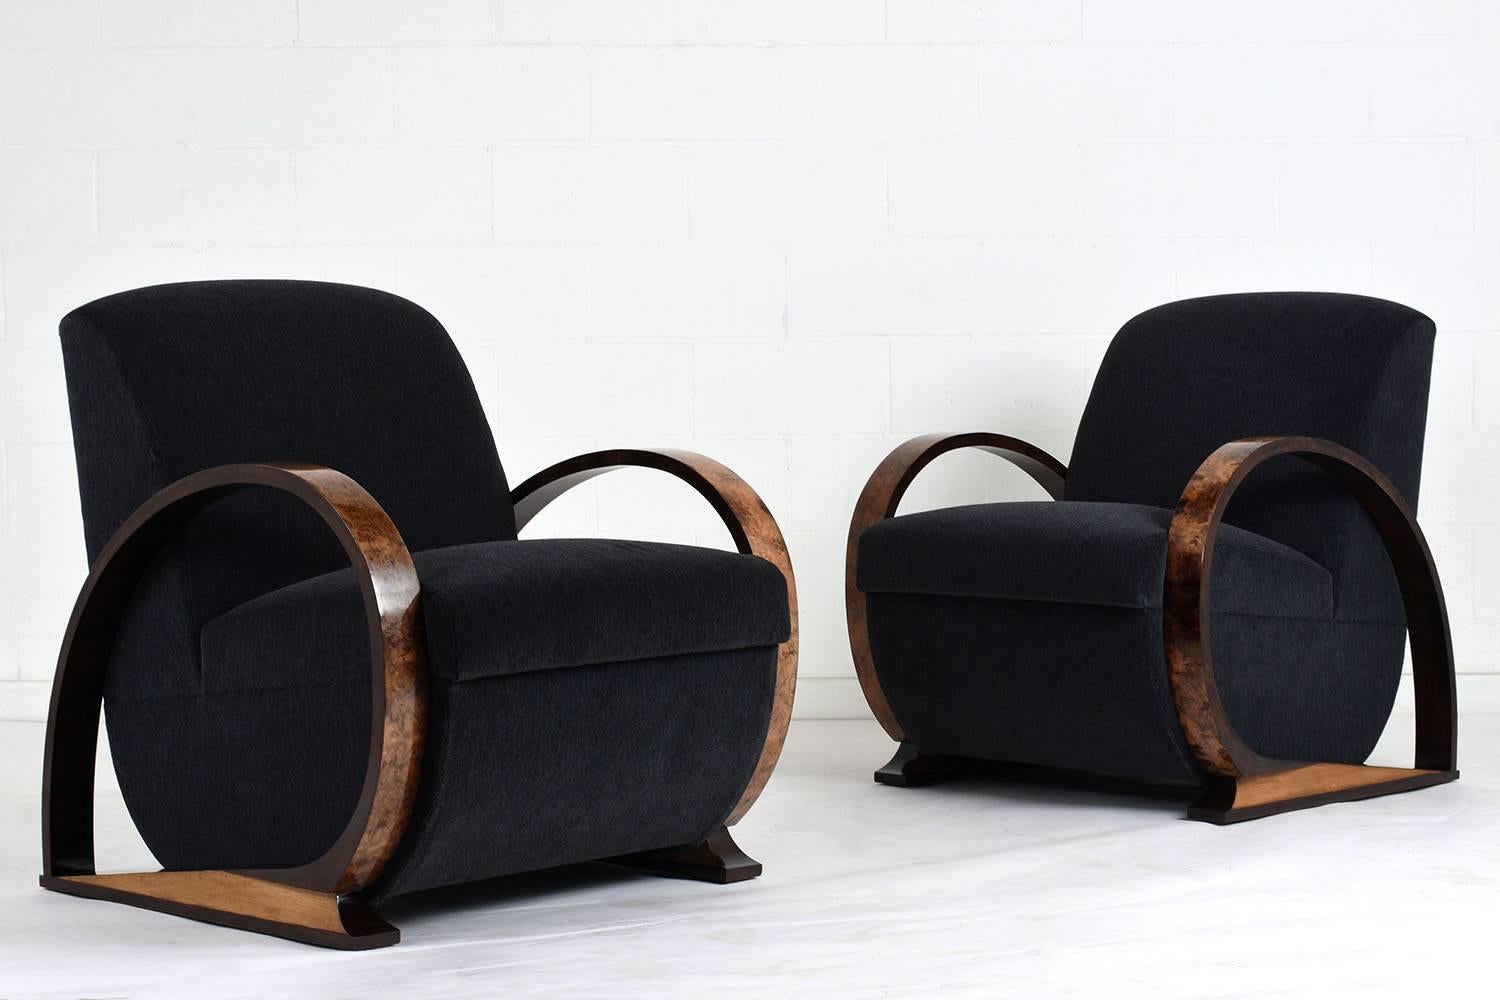 This pair of 1930s French Art Deco-style bentwood armchairs feature two-tone wood frames stained in a light and dark walnut color with a lacquered finish. The unique curve of the armrests are accented by burl wood veneers. The curved bottom of the